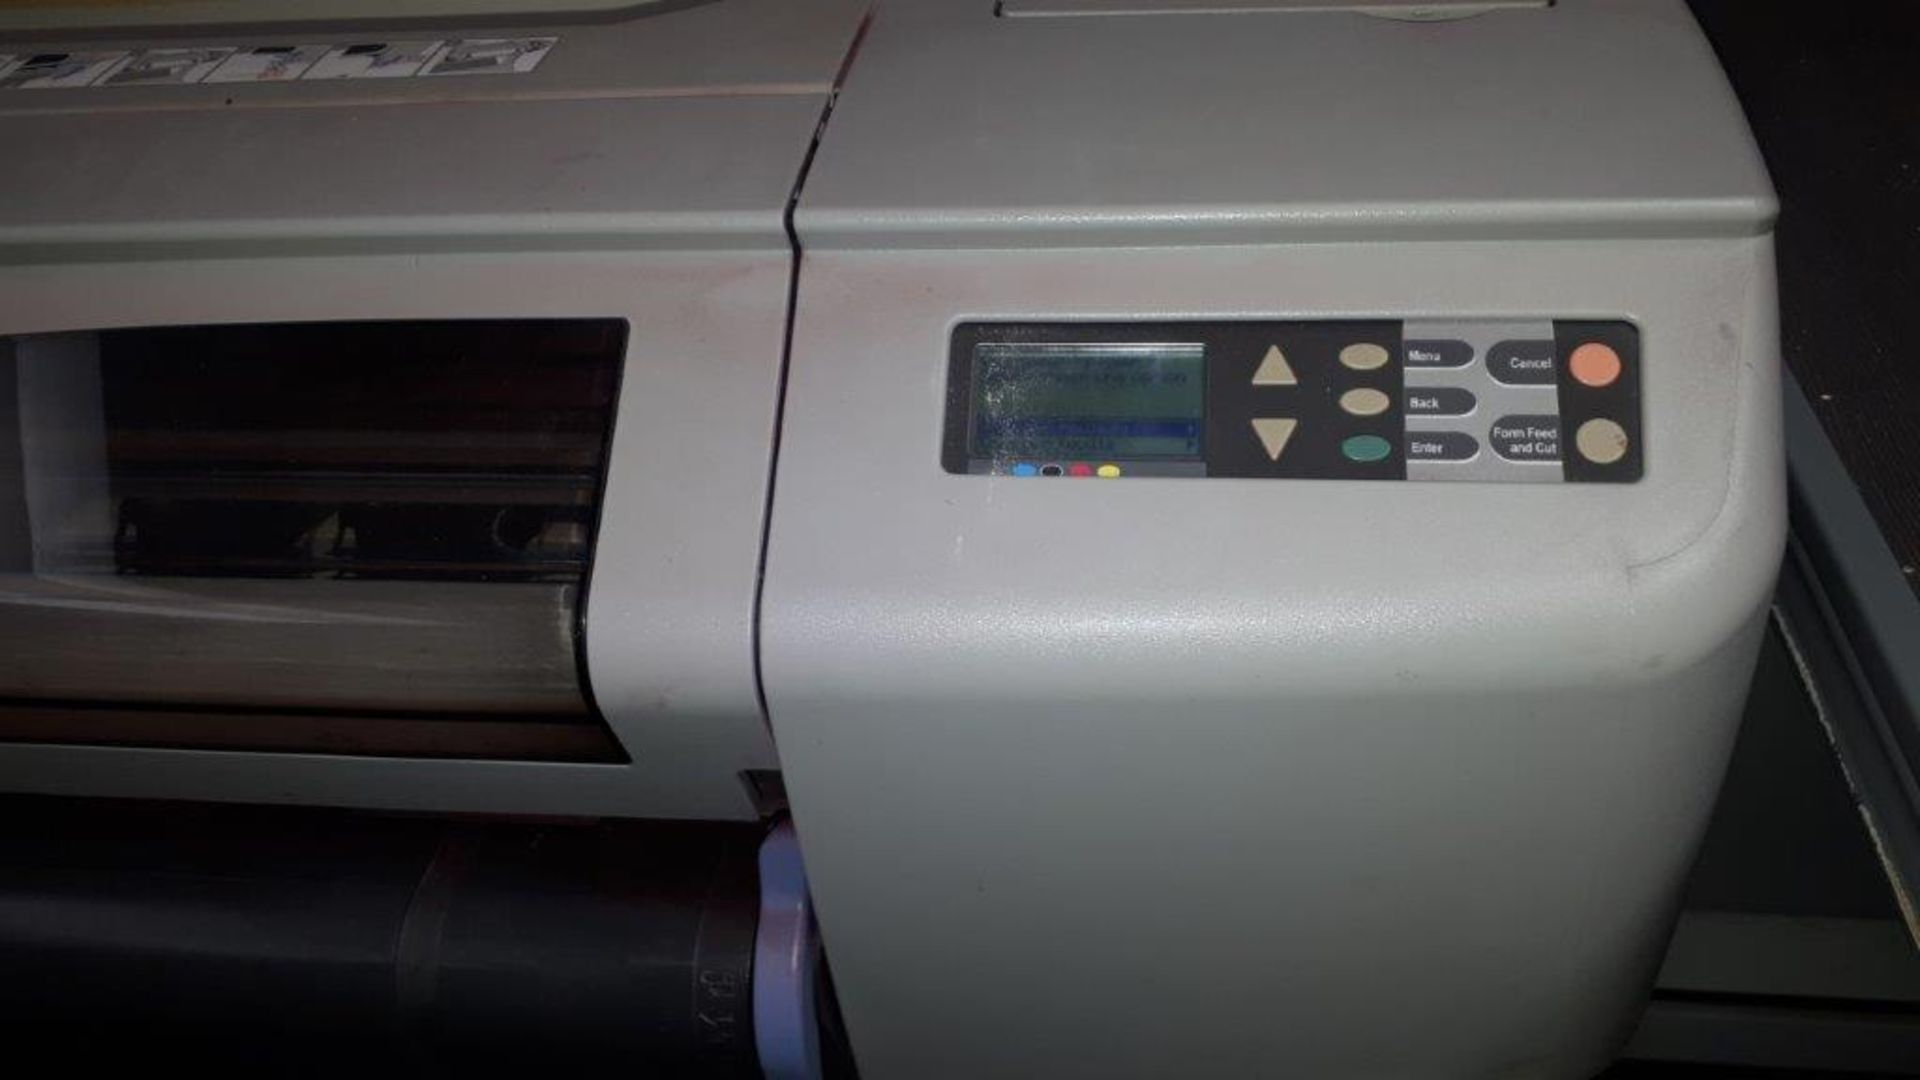 HEWLETT PACKARD DesignJet 500PS large scale printer w/Lexmark & inks - Image 5 of 7